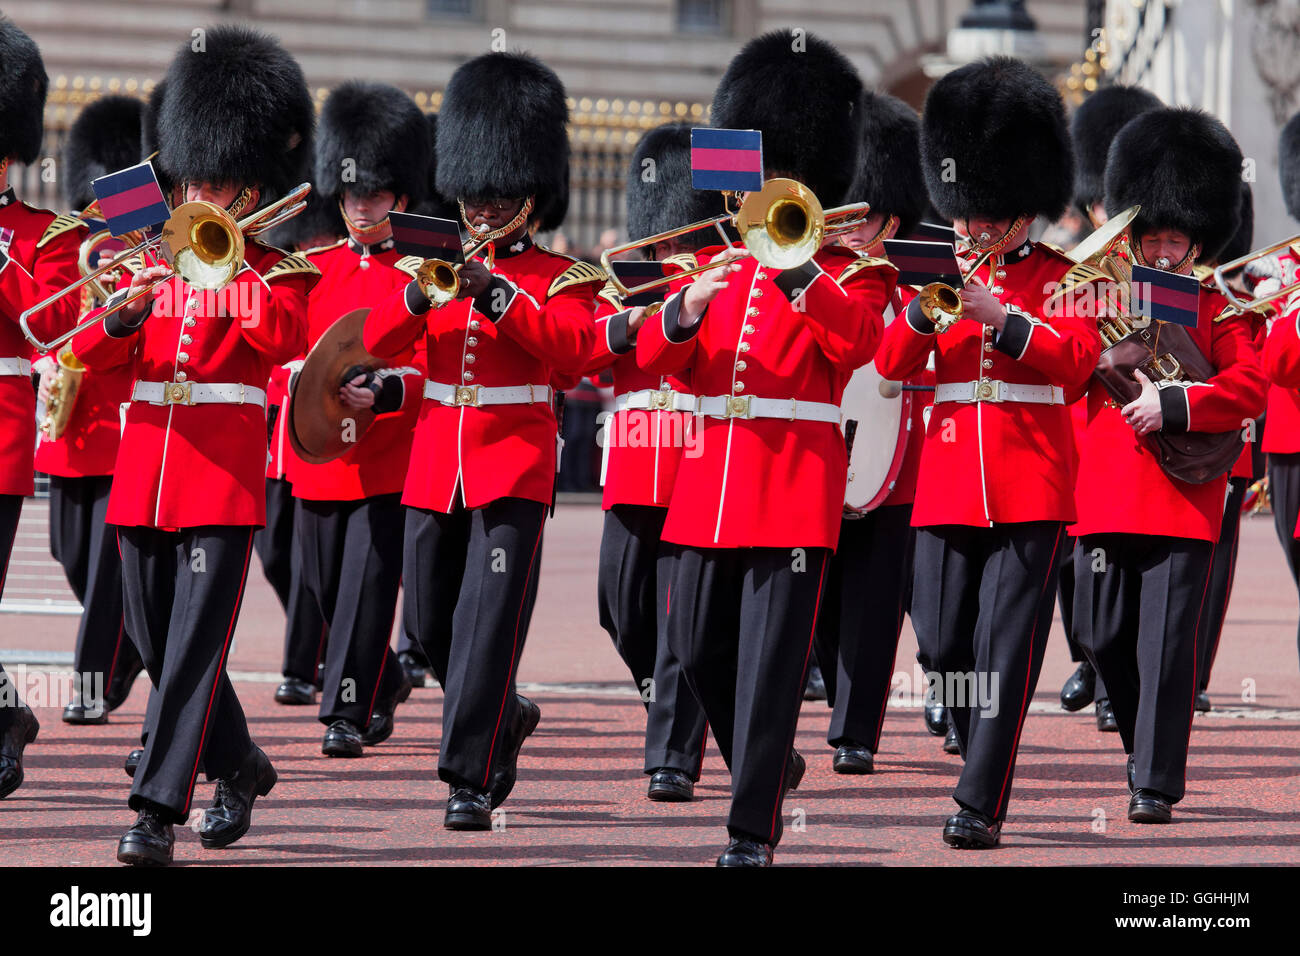 Changing of the guards in front of Buckingham Palace, London, England, United Kingdom Stock Photo